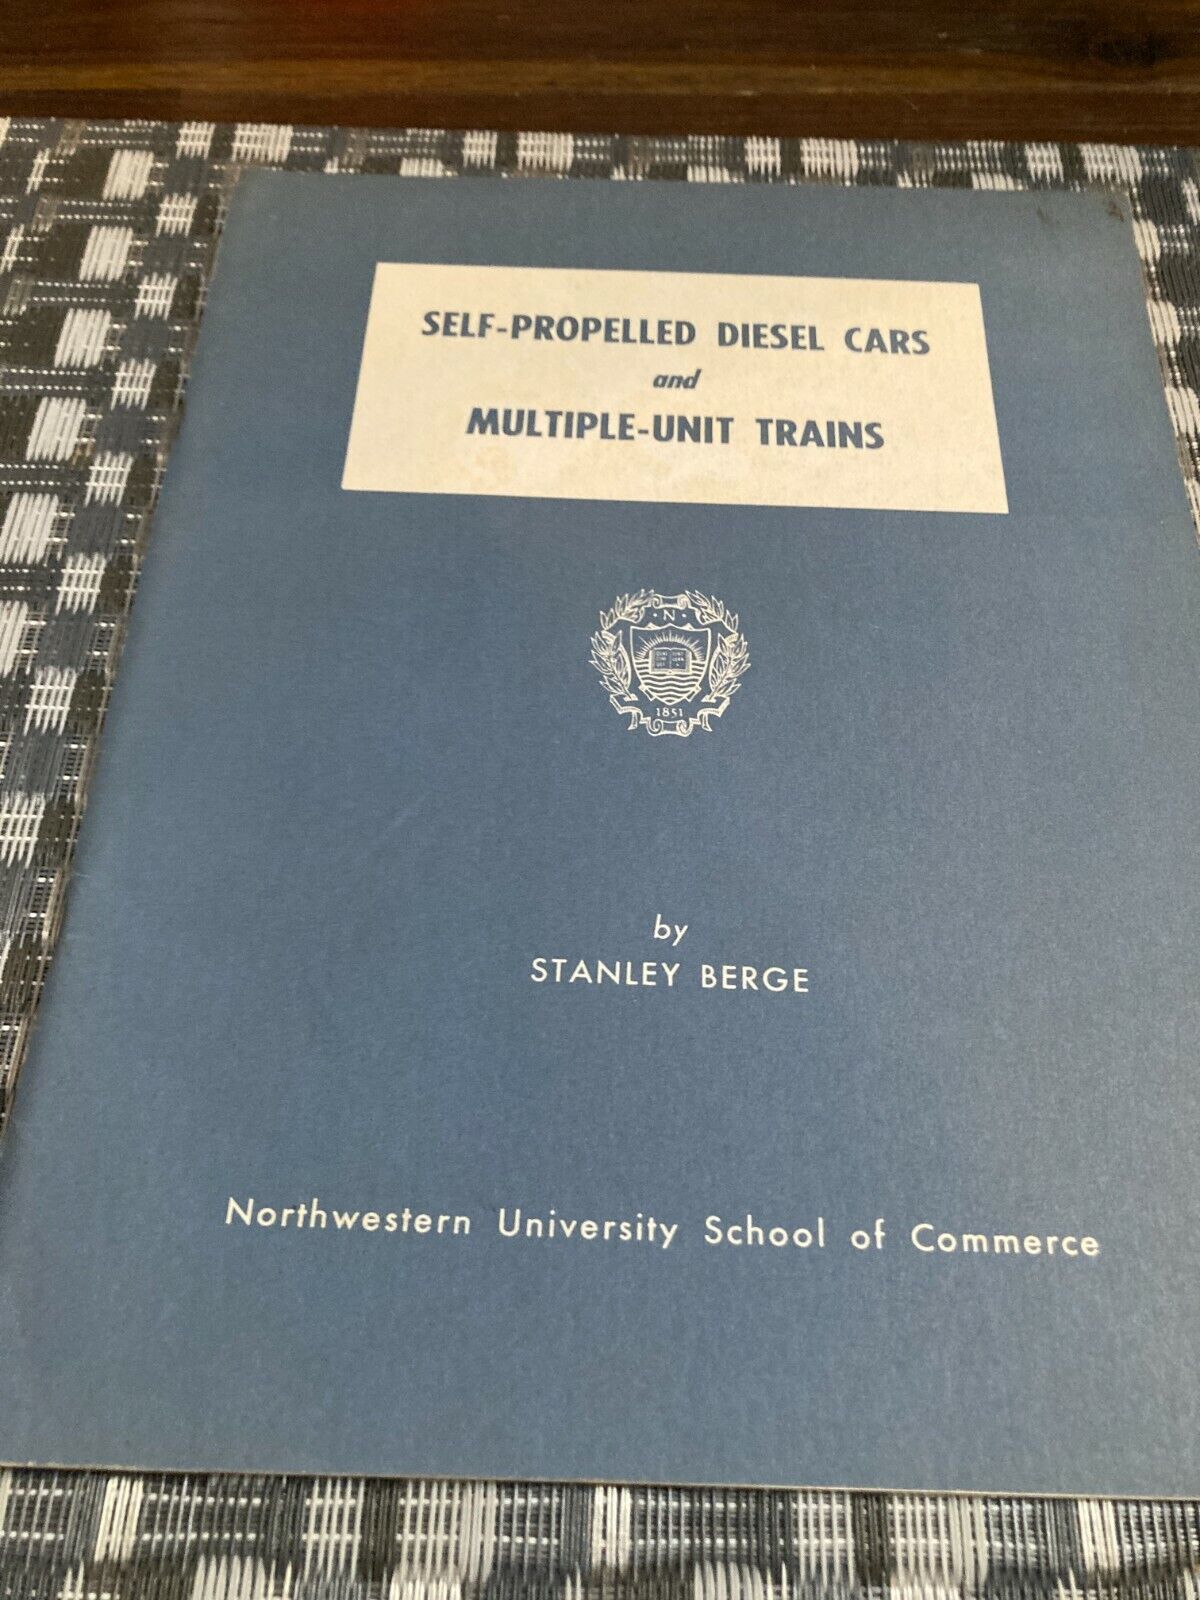 Self-Propelled Diesel Cars and Multiple-Unit Trains 1952 by Stanley Berge